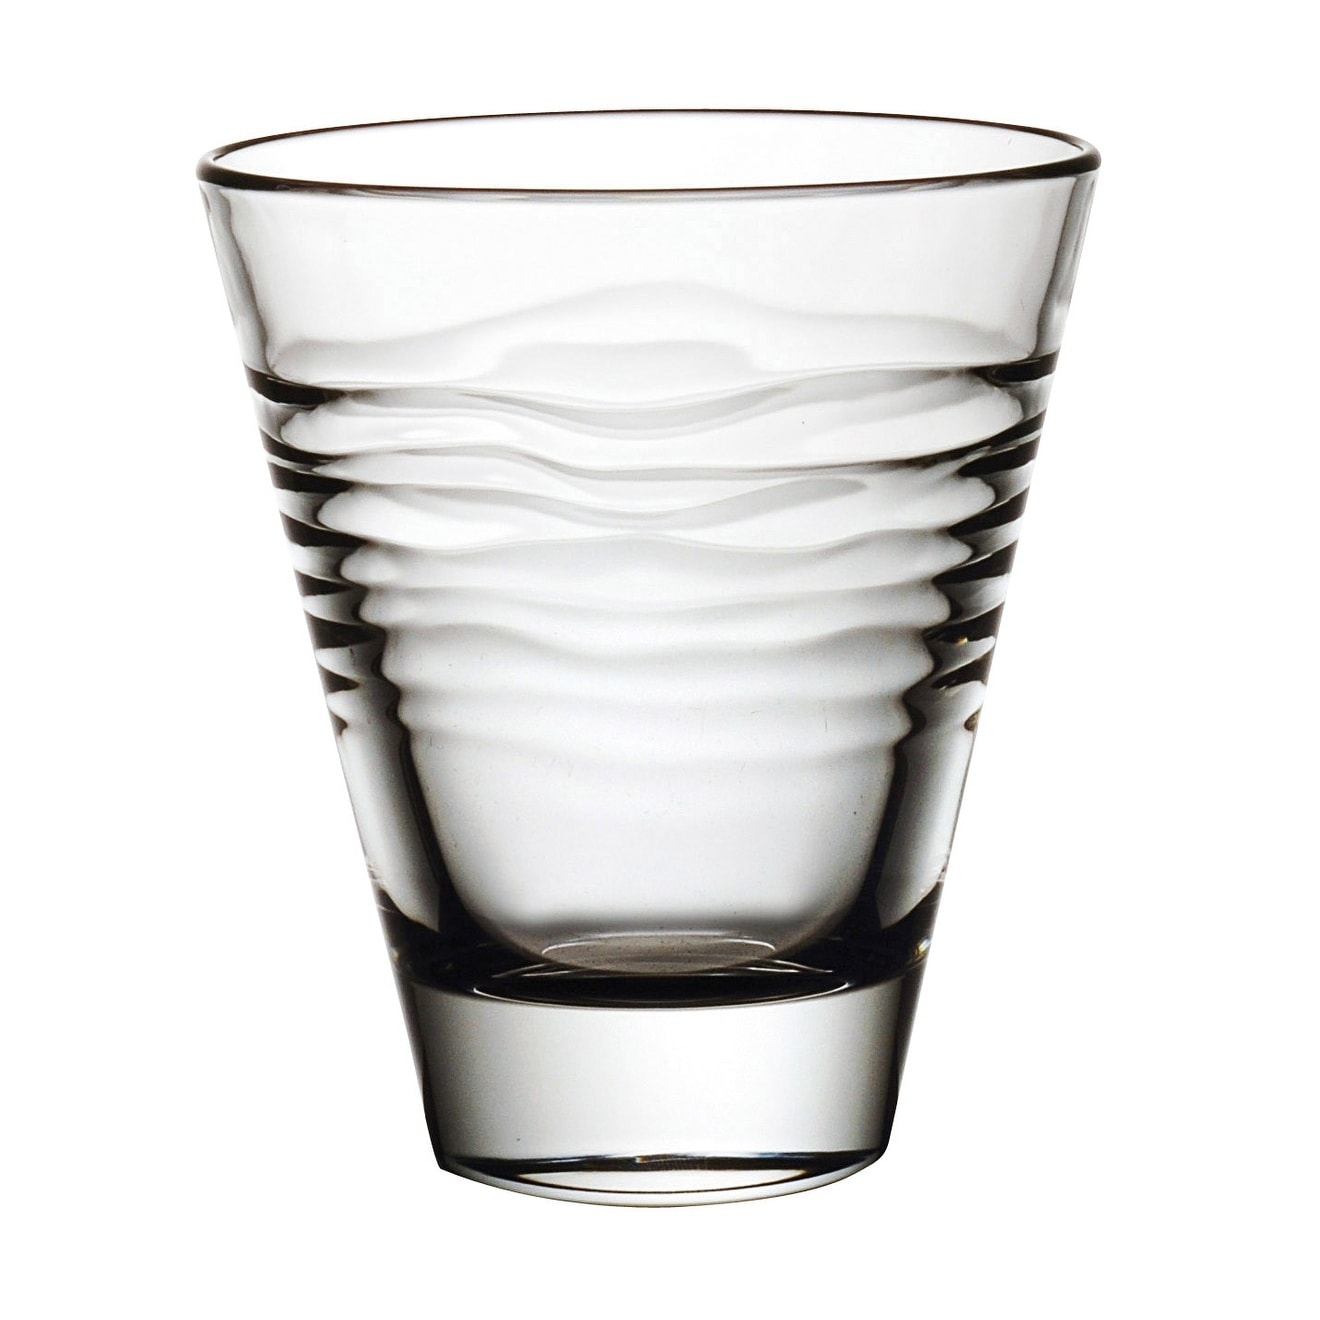 Majestic Gifts High Quality Glass Double Old Fashioned Tumblers-10 oz-S/6